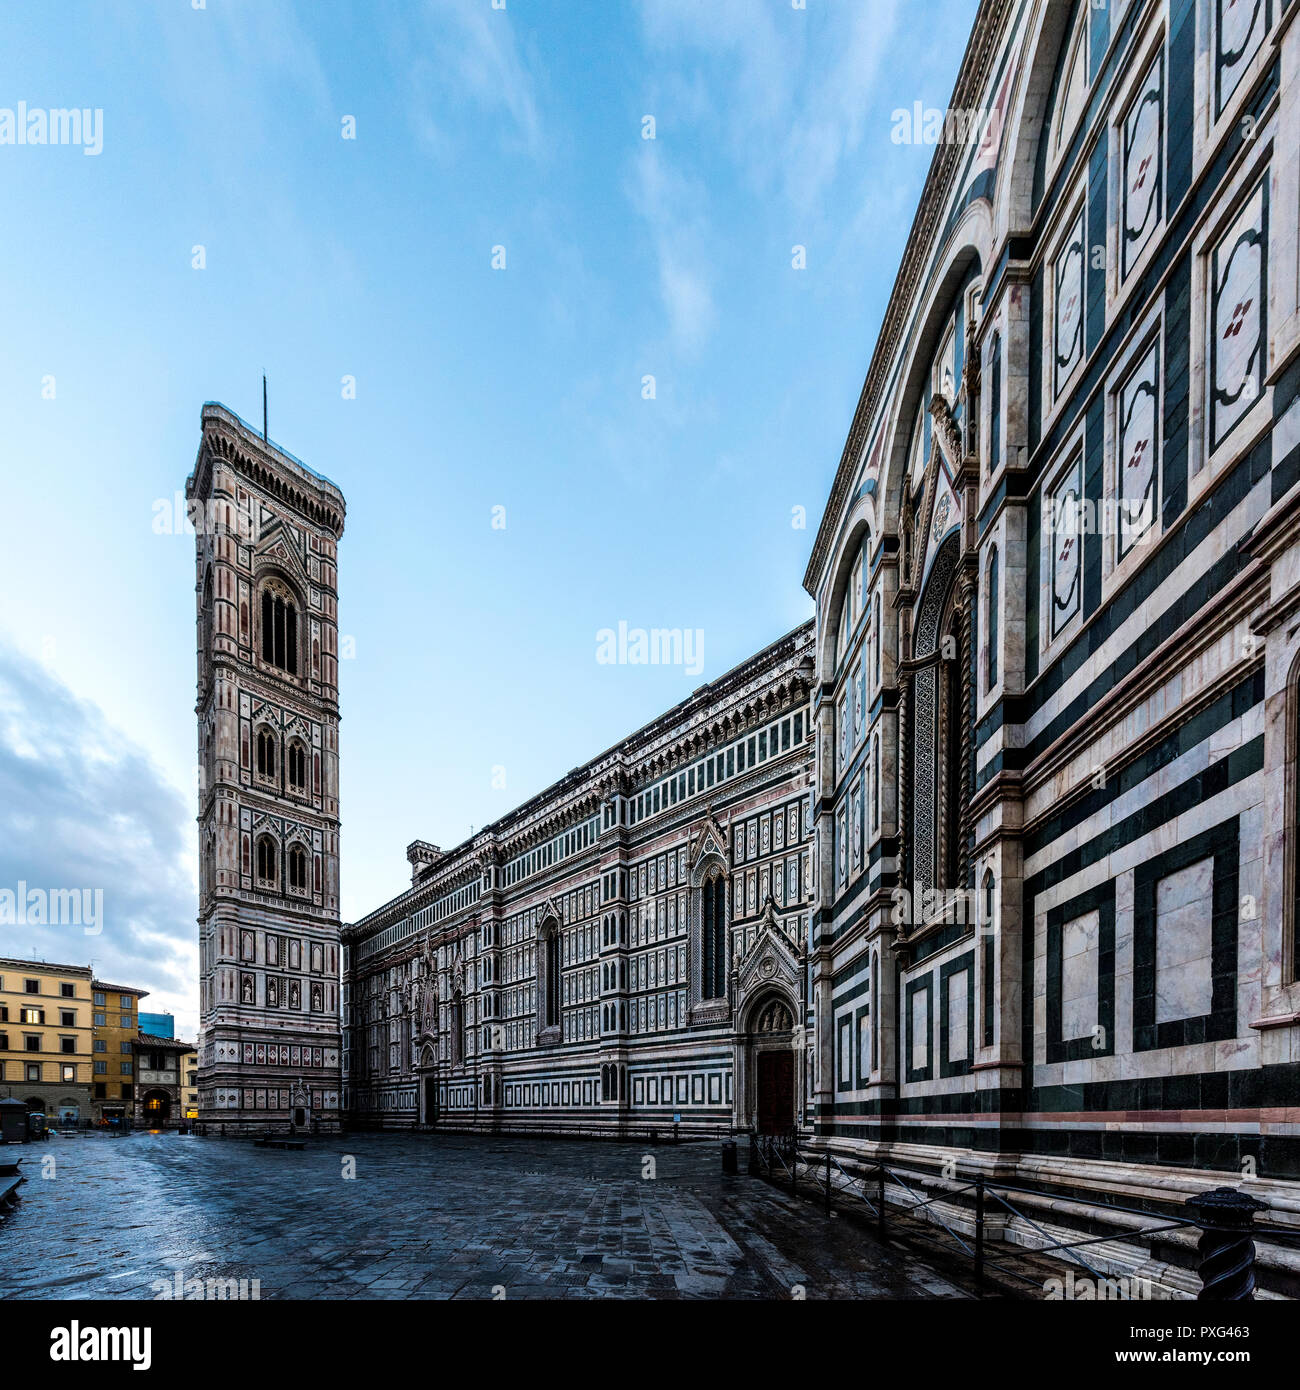 Duomo di Firenze Cathedral, Florence Cathedral, Florence, Italy, Europe Stock Photo